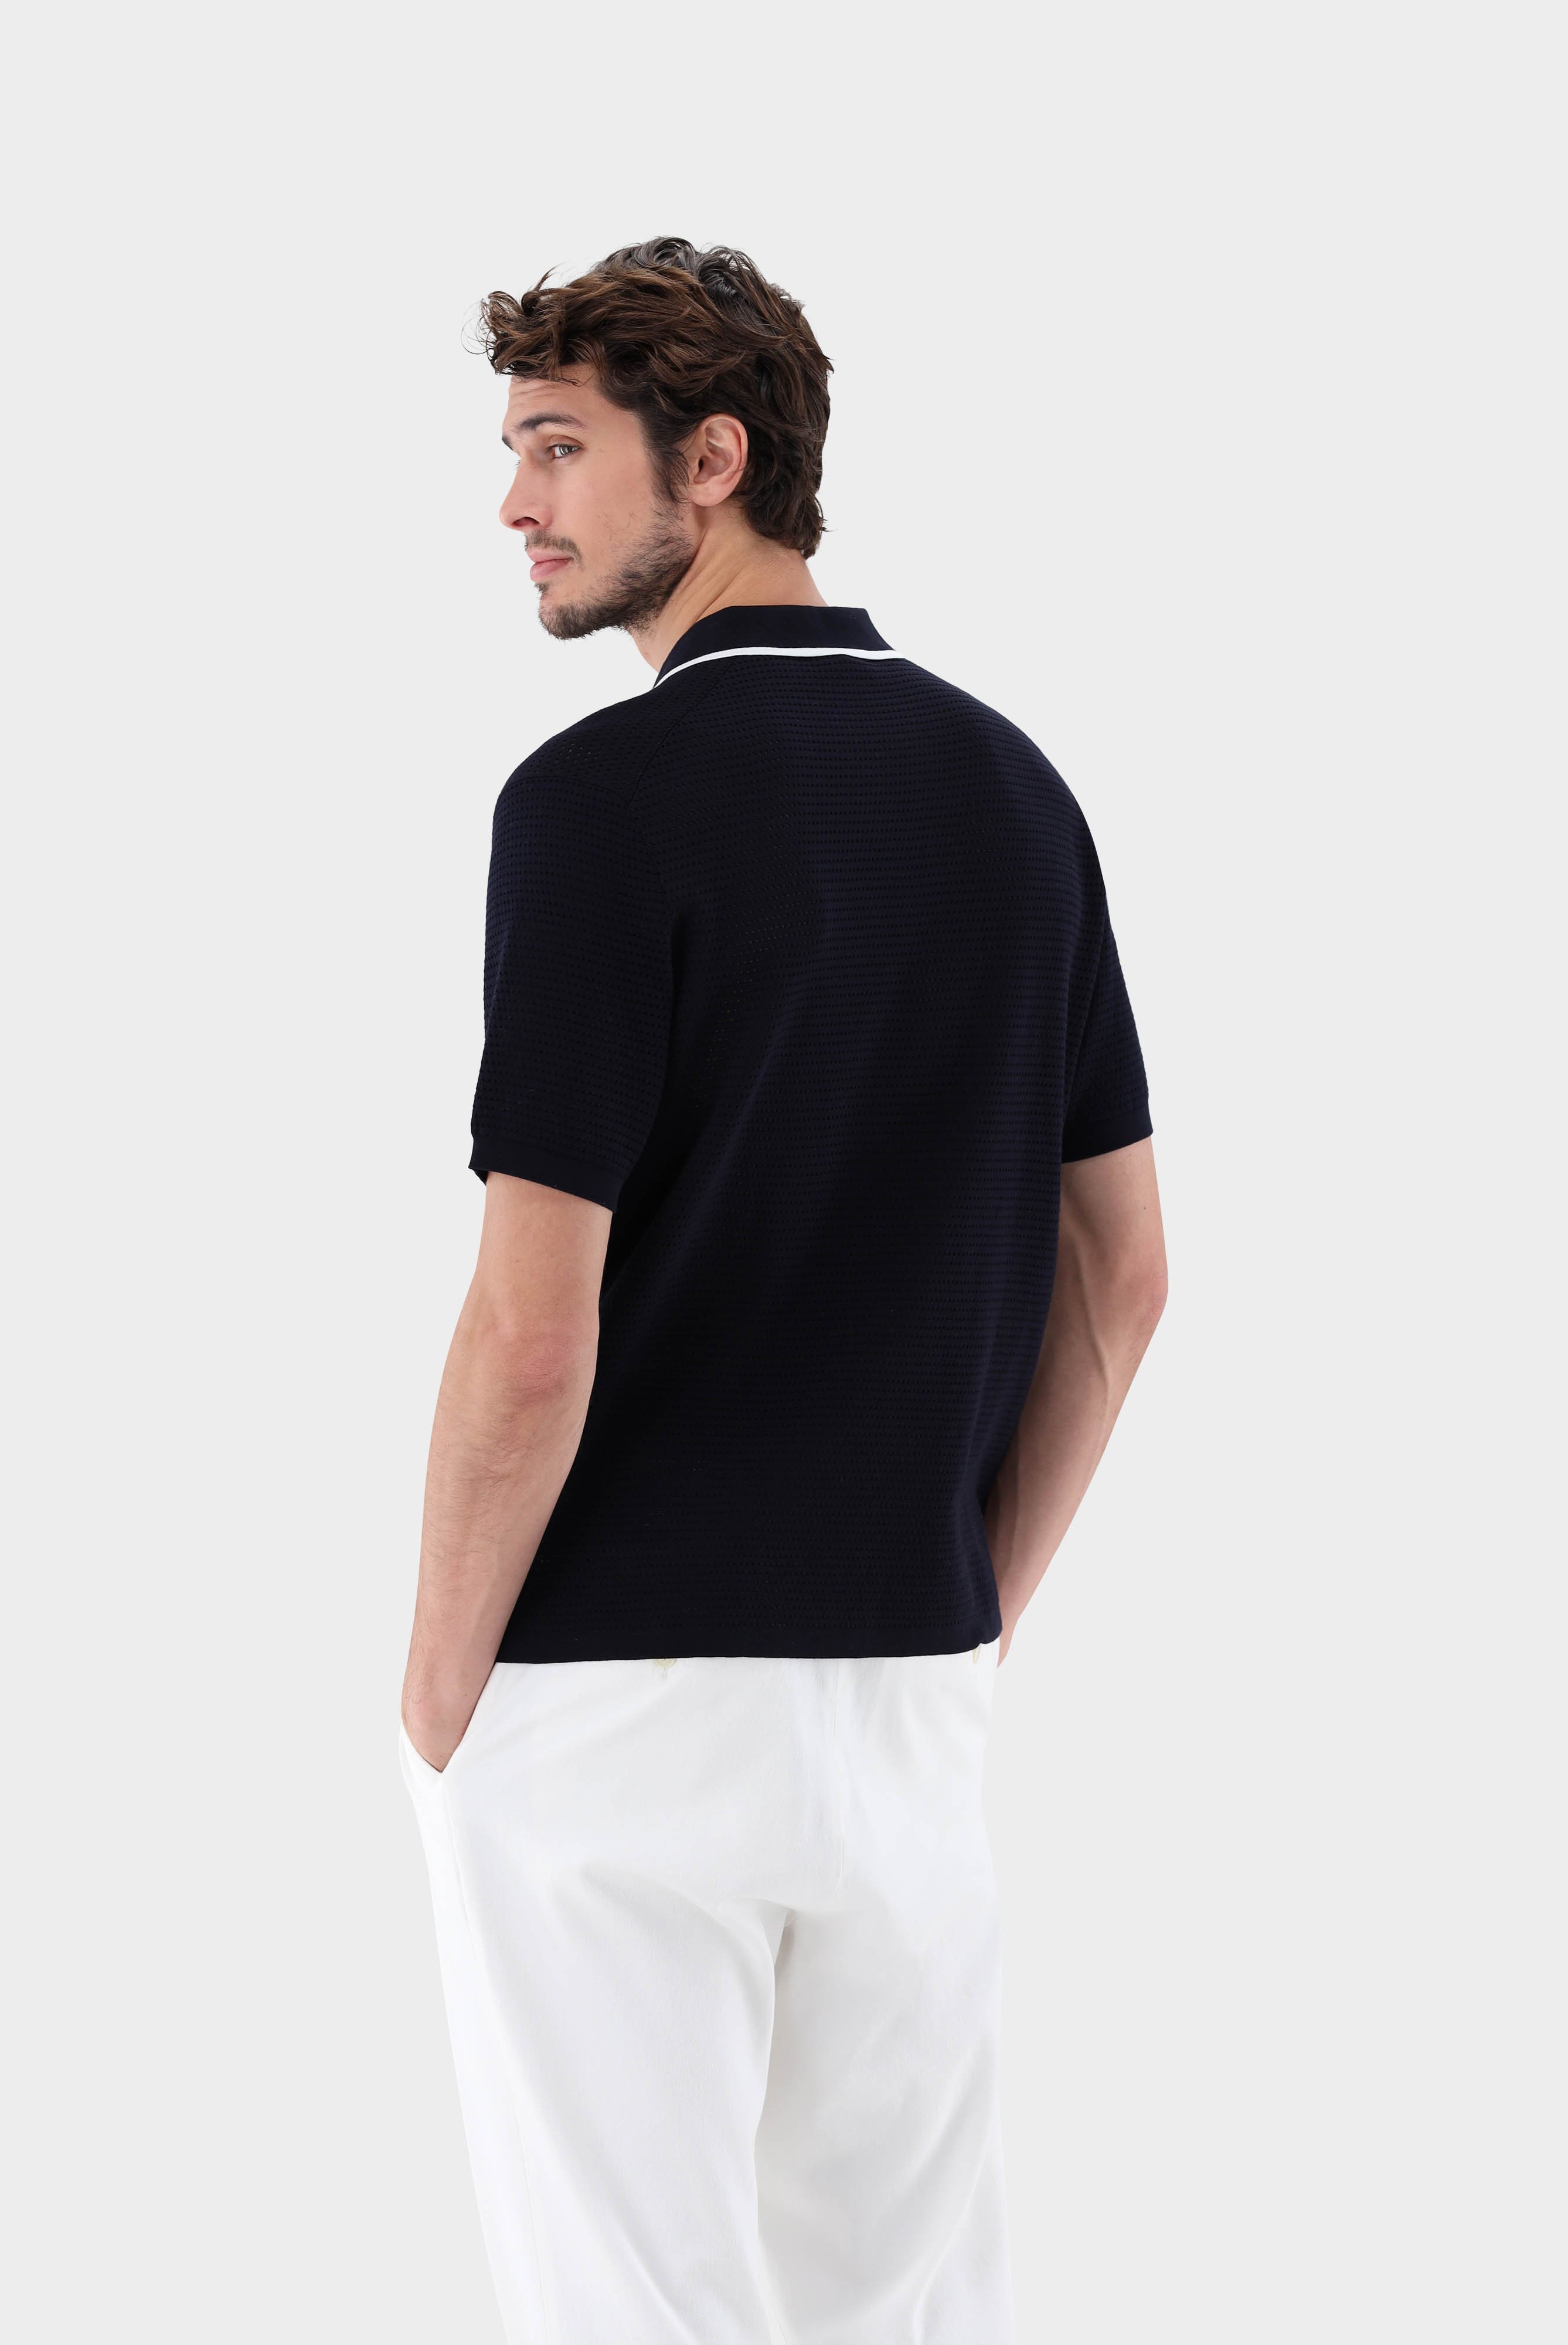 Poloshirts+Knit polo with mesh structure and contrast collar+82.8645.S7.S00267.795.L